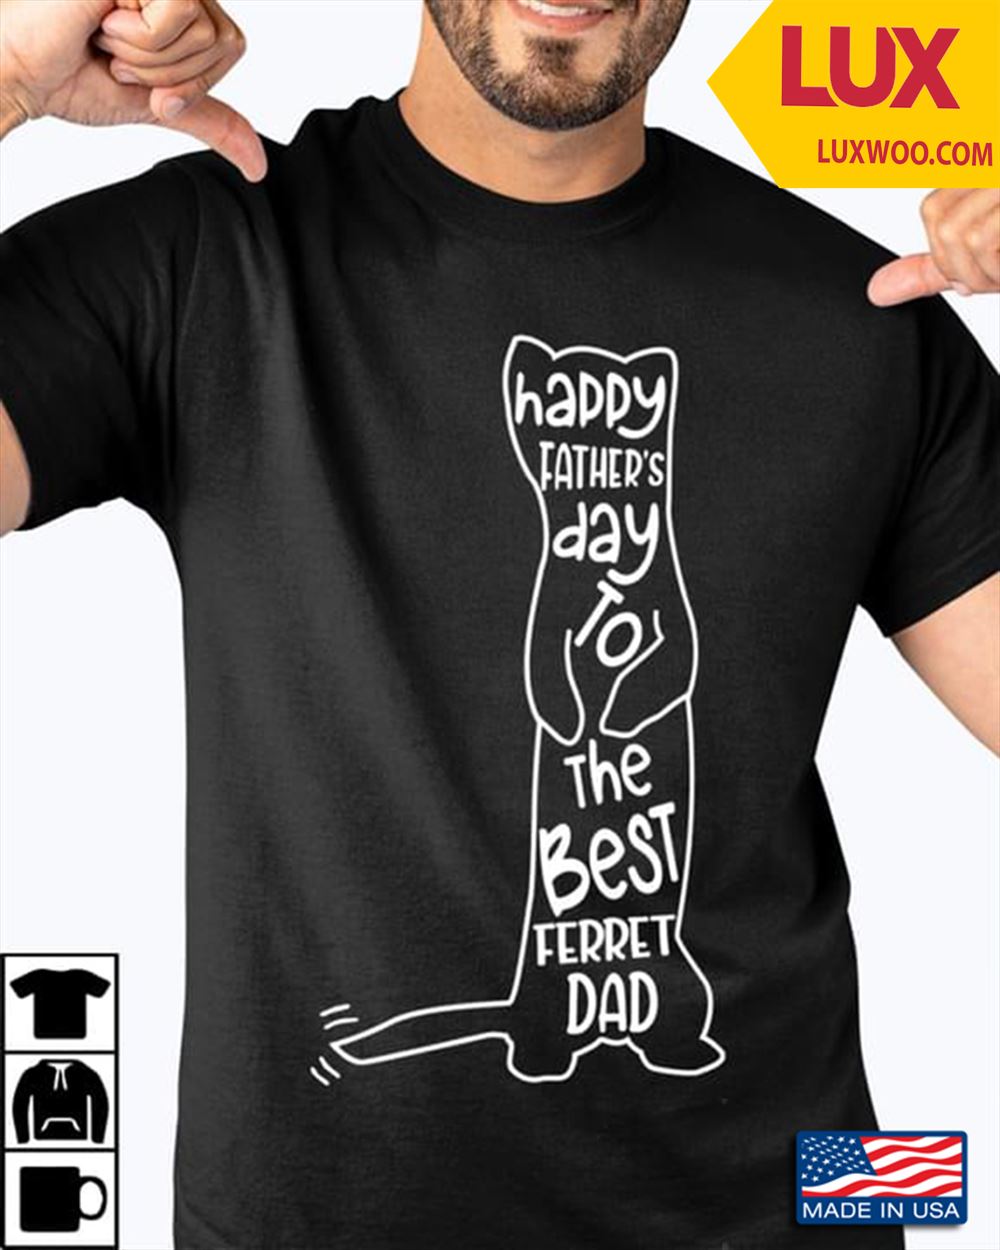 Happy Fathers Day To The Best Ferret Dad Shirt Size Up To 5xl